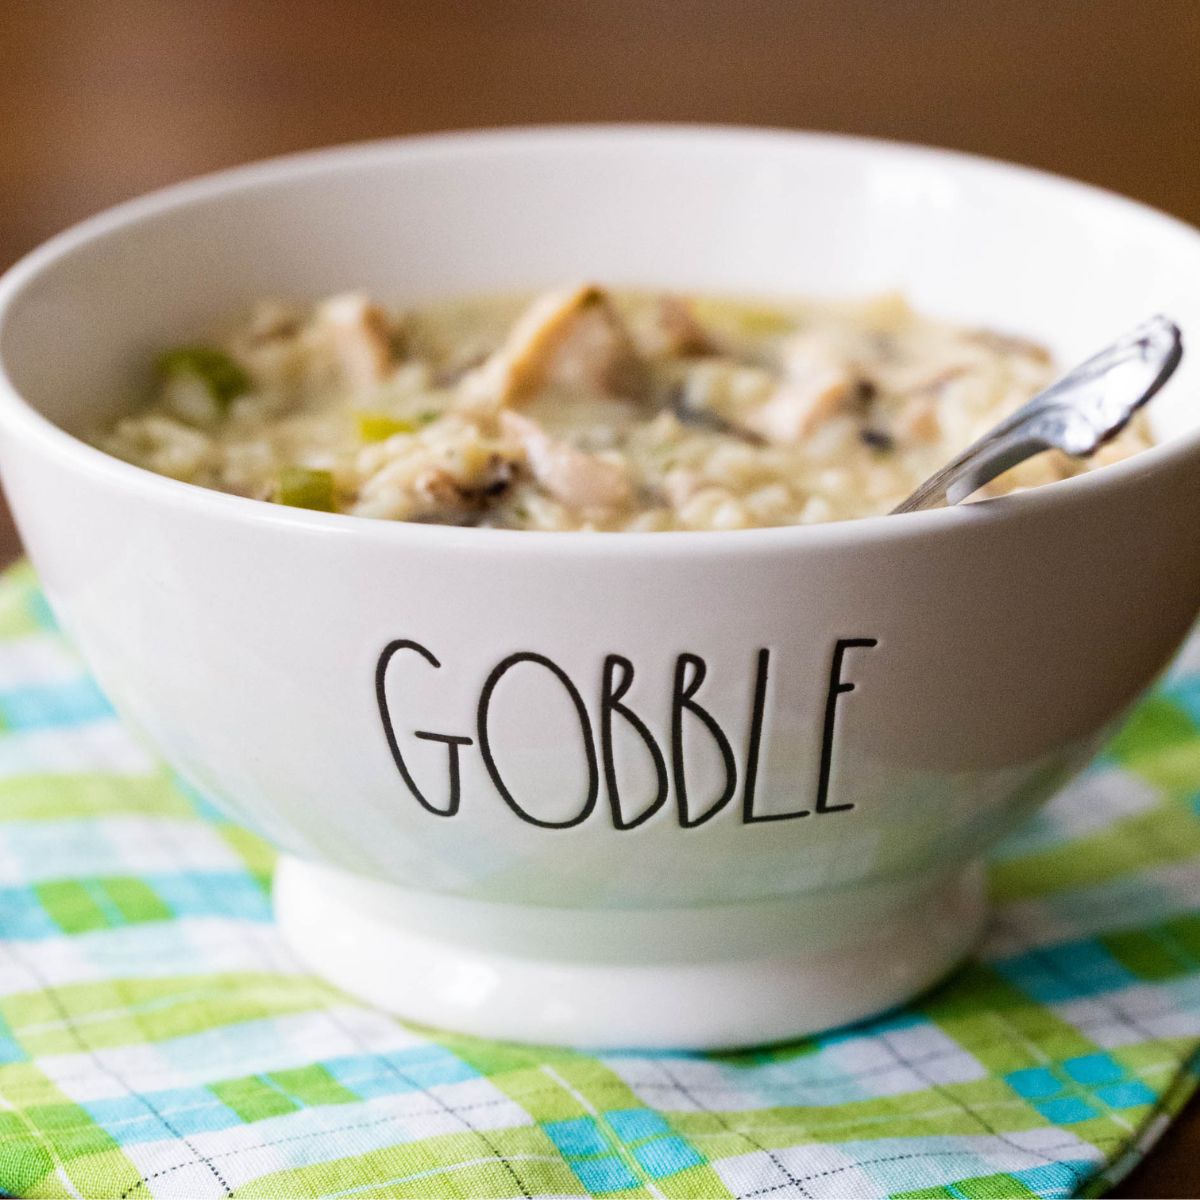 A bowl of creamy turkey soup says "Gobble" on the front.